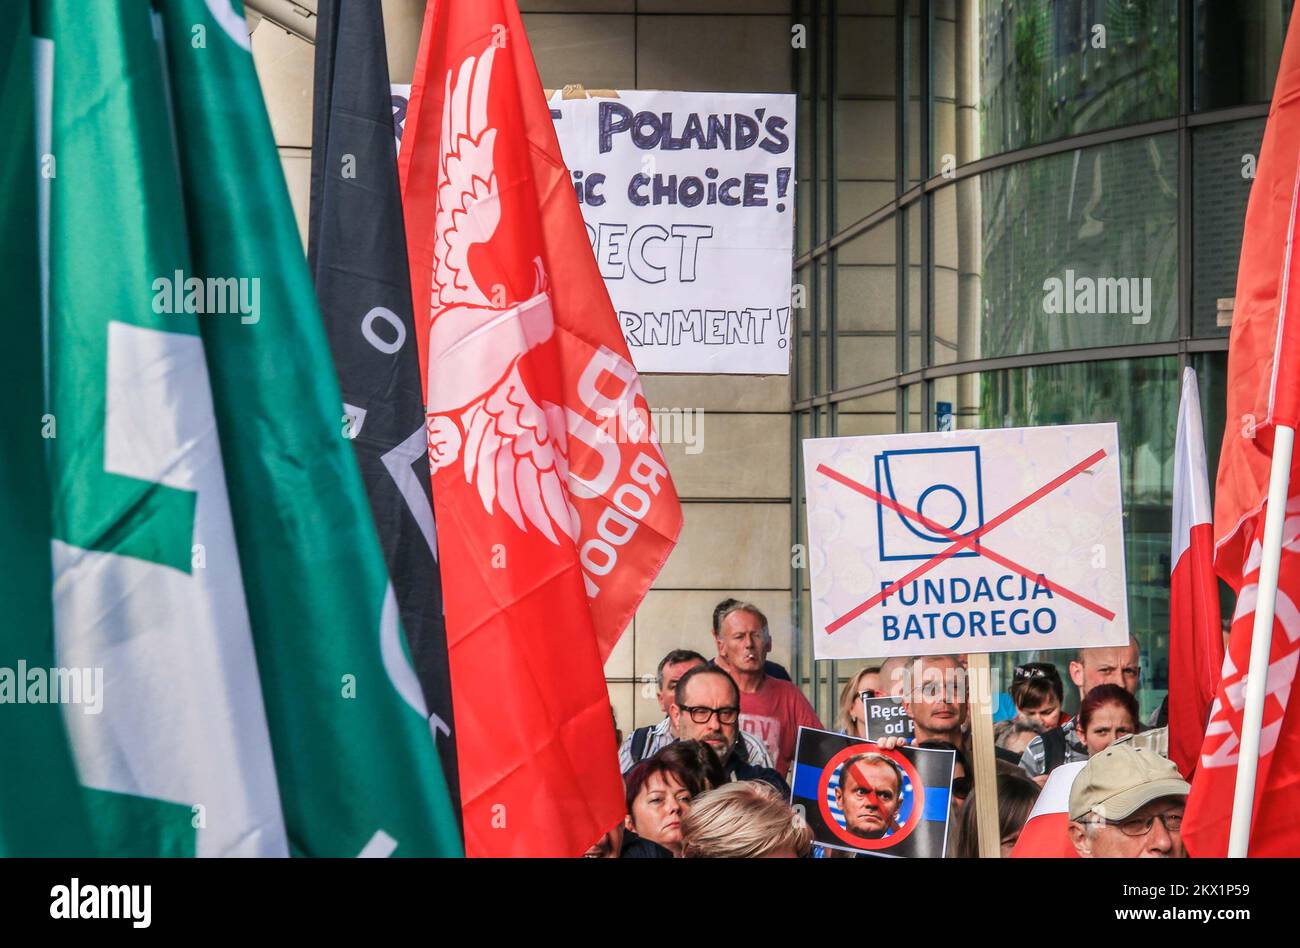 26.07.2017., Warsaw, Poland - The European Union's executive remains open to triggering sanctions against Poland for limiting judicial independence despite the Polish president Andrzej Duda's veto of parts of a controversial legal overhaul. Protesters were showing their displeasure with the conservative government's policies, especially with the legal overhaul. Youth-heavy far-right organizations National Radical Camp (ONR) and the National Movement protesters in front of the European Commission Representation office and shouted 'Moscow yesterday, Brussels today'. Photo: Robert Mijic/HaloPix/P Stock Photo